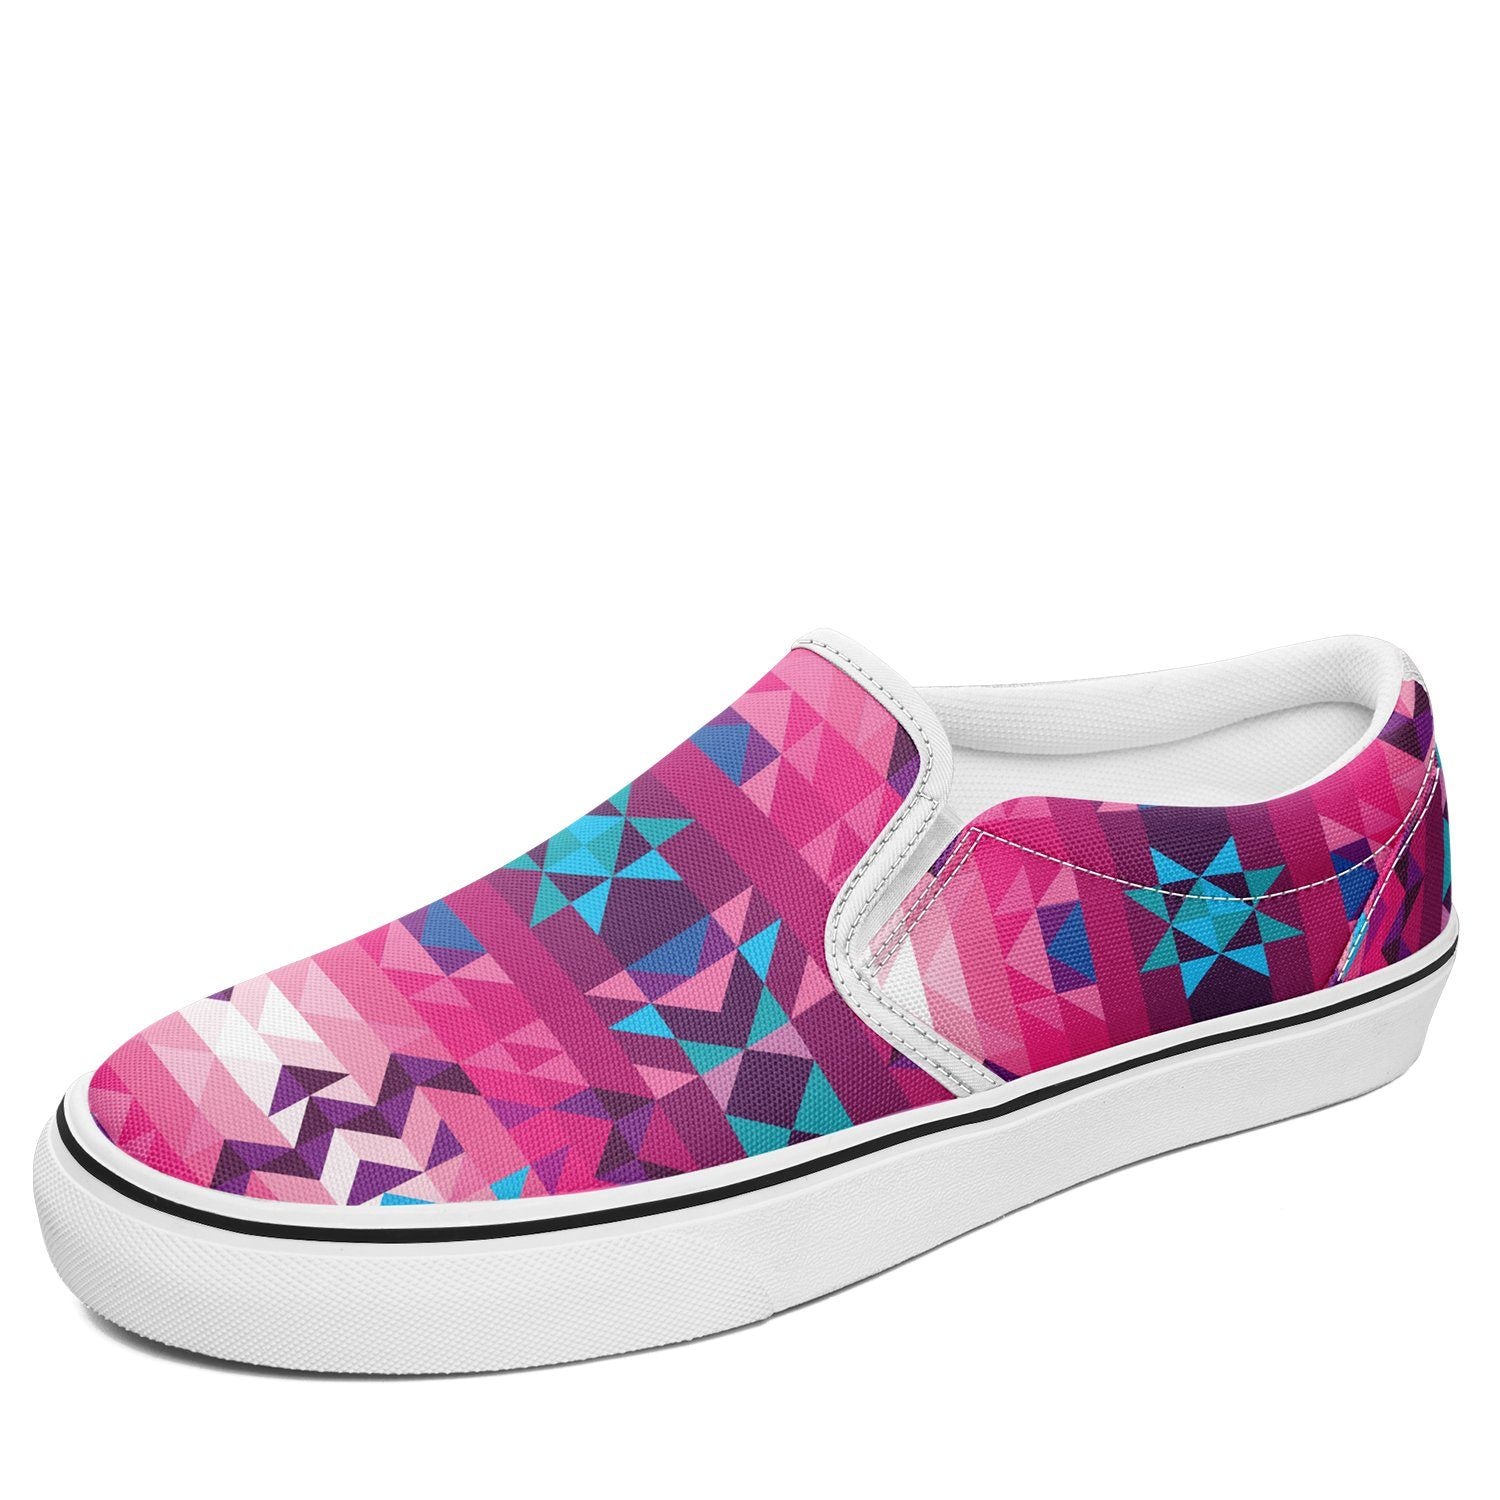 Bright Wave Otoyimm Canvas Slip On Shoes otoyimm Herman US Youth 1 / EUR 32 White Sole 